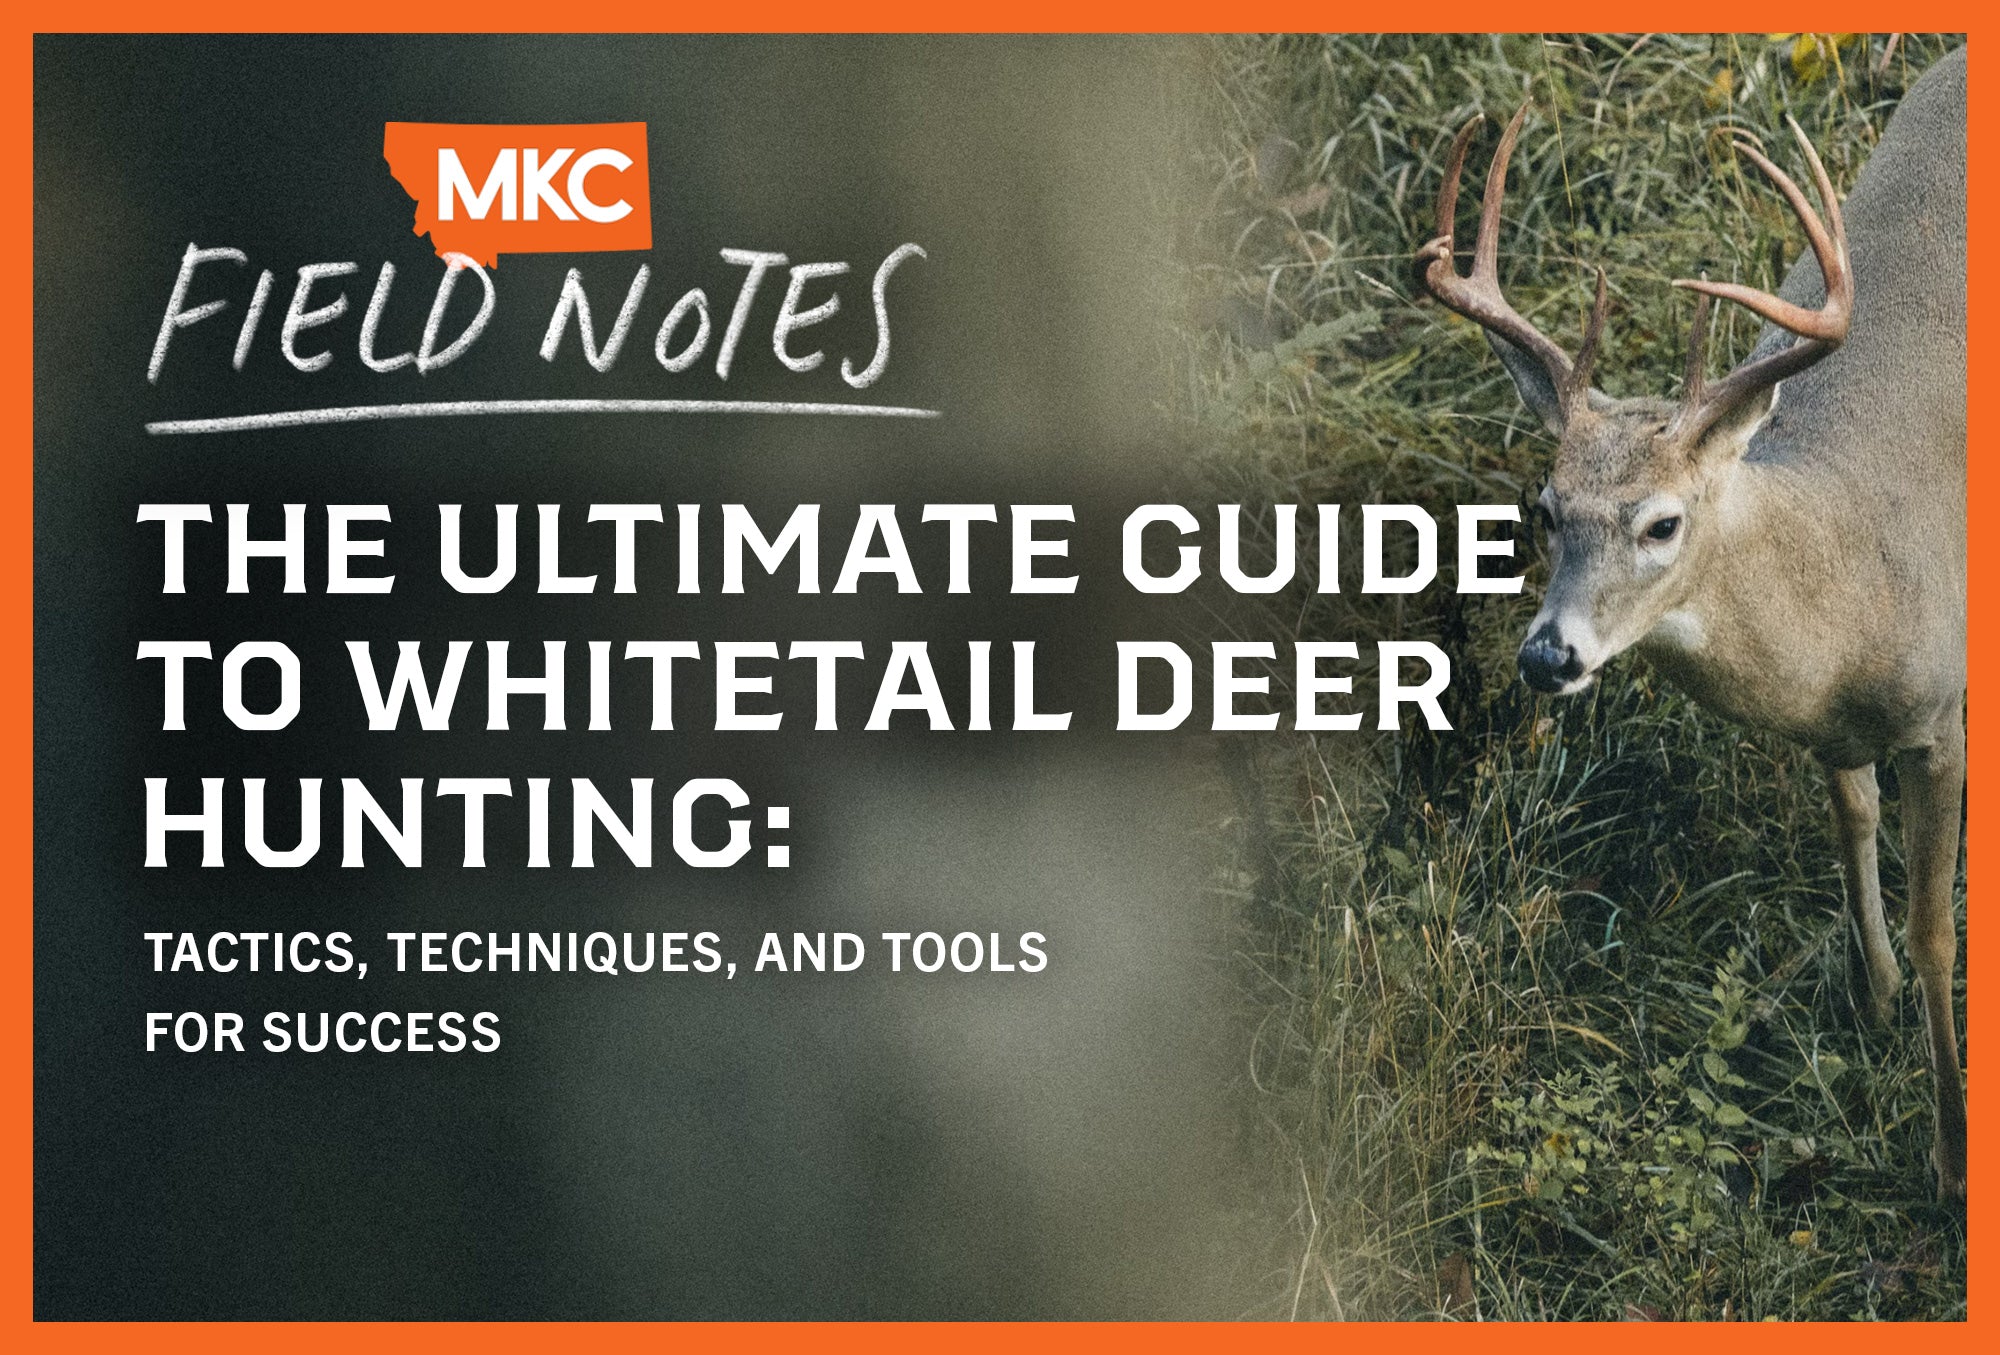 A deer looks up while a hunter waits in a treestand, representing whitetail deer hunting tips.